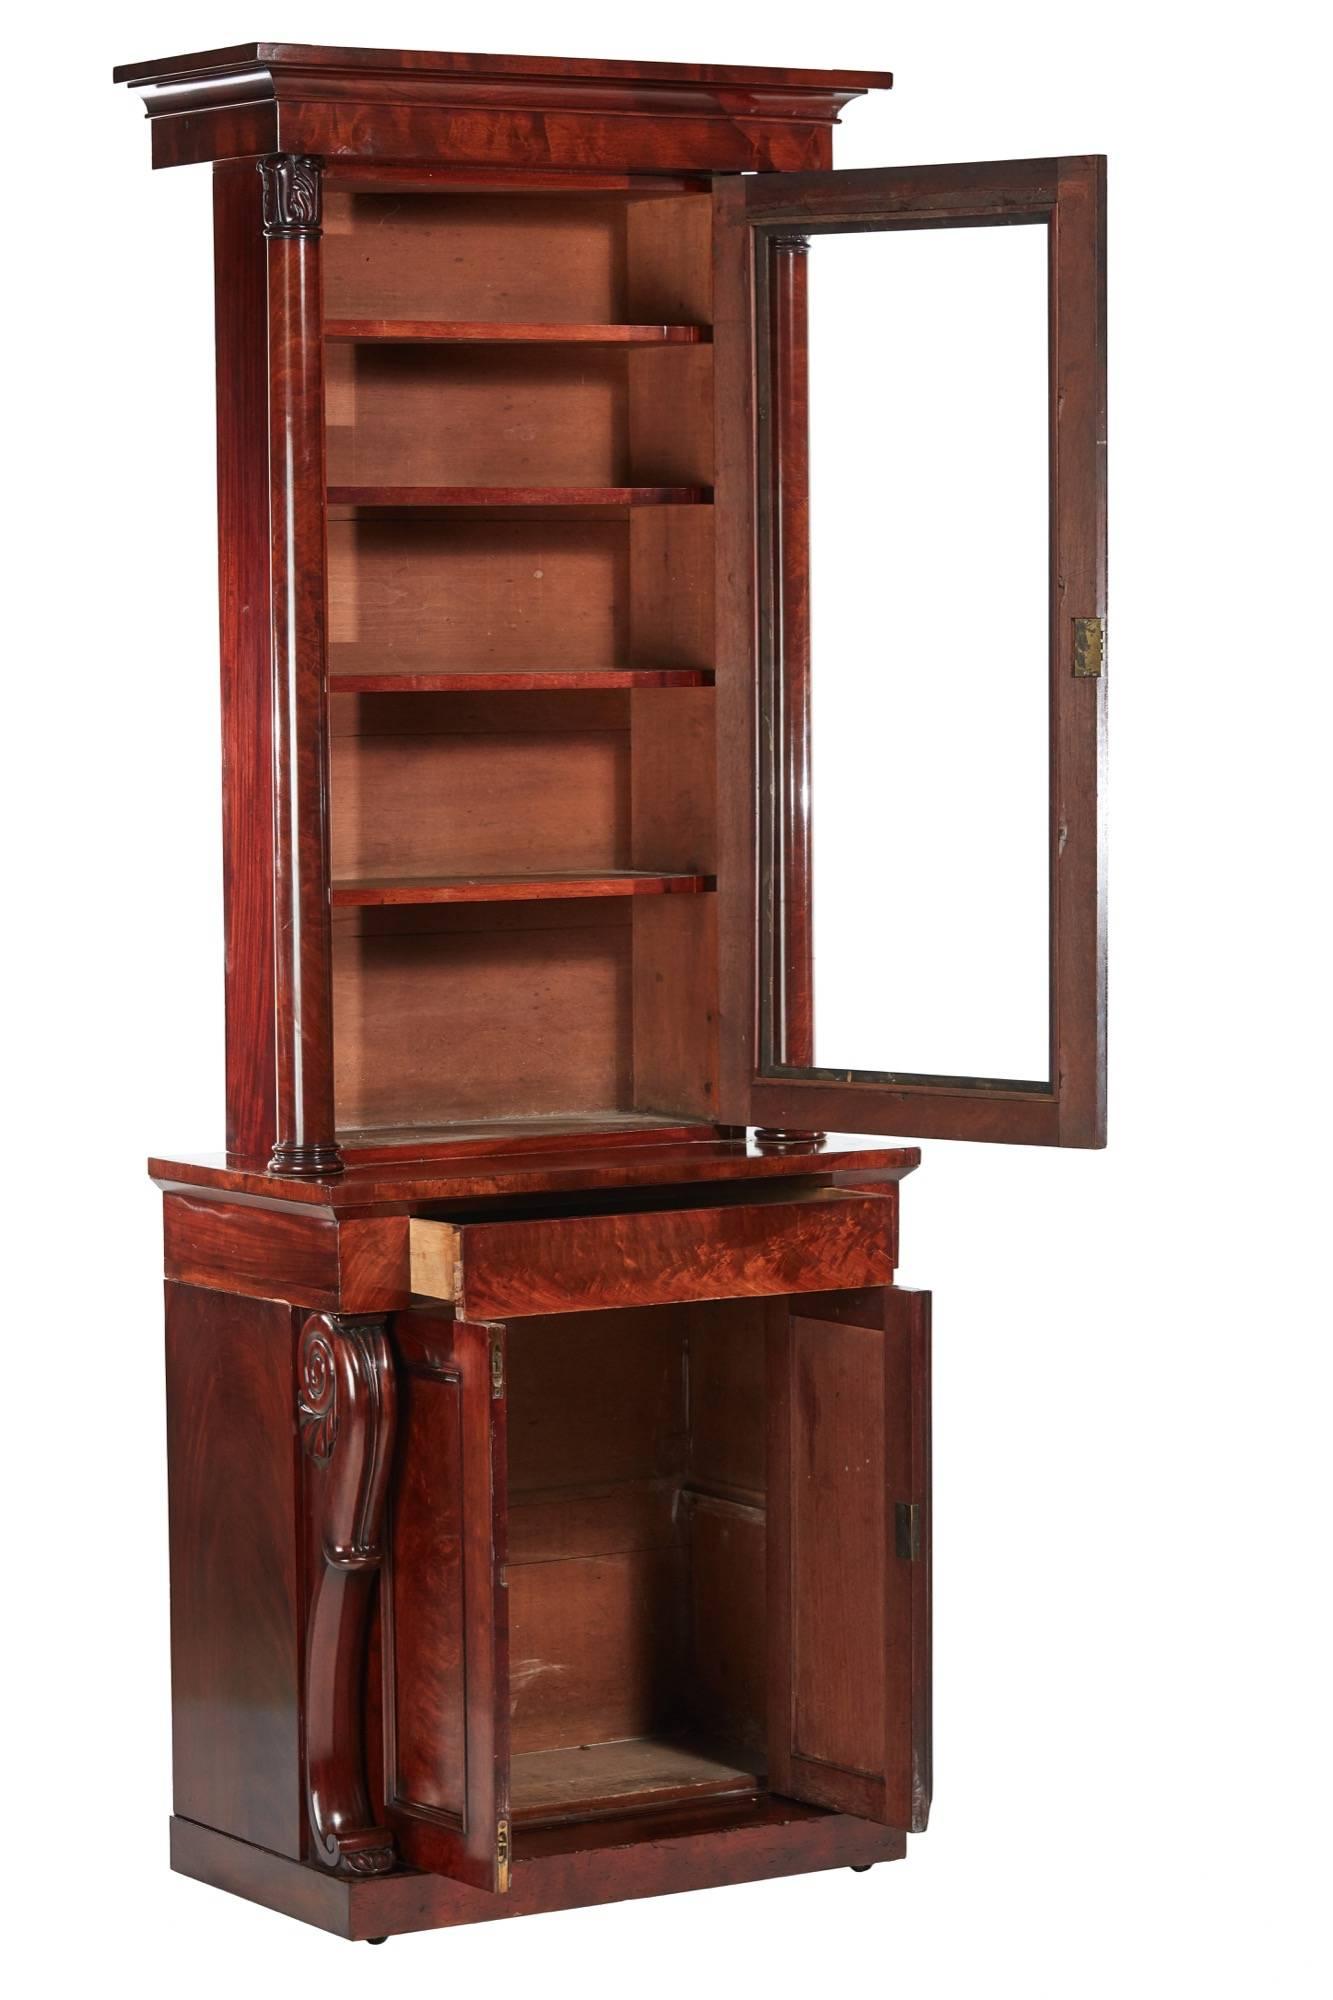 Quality William IV mahogany bookcase, the upper section having a shaped cornice, one single glazed door opens to reveal four adjustable shelves. Lovely carved turned columns, the base having one frieze drawer, two doors and fantastic carved shaped